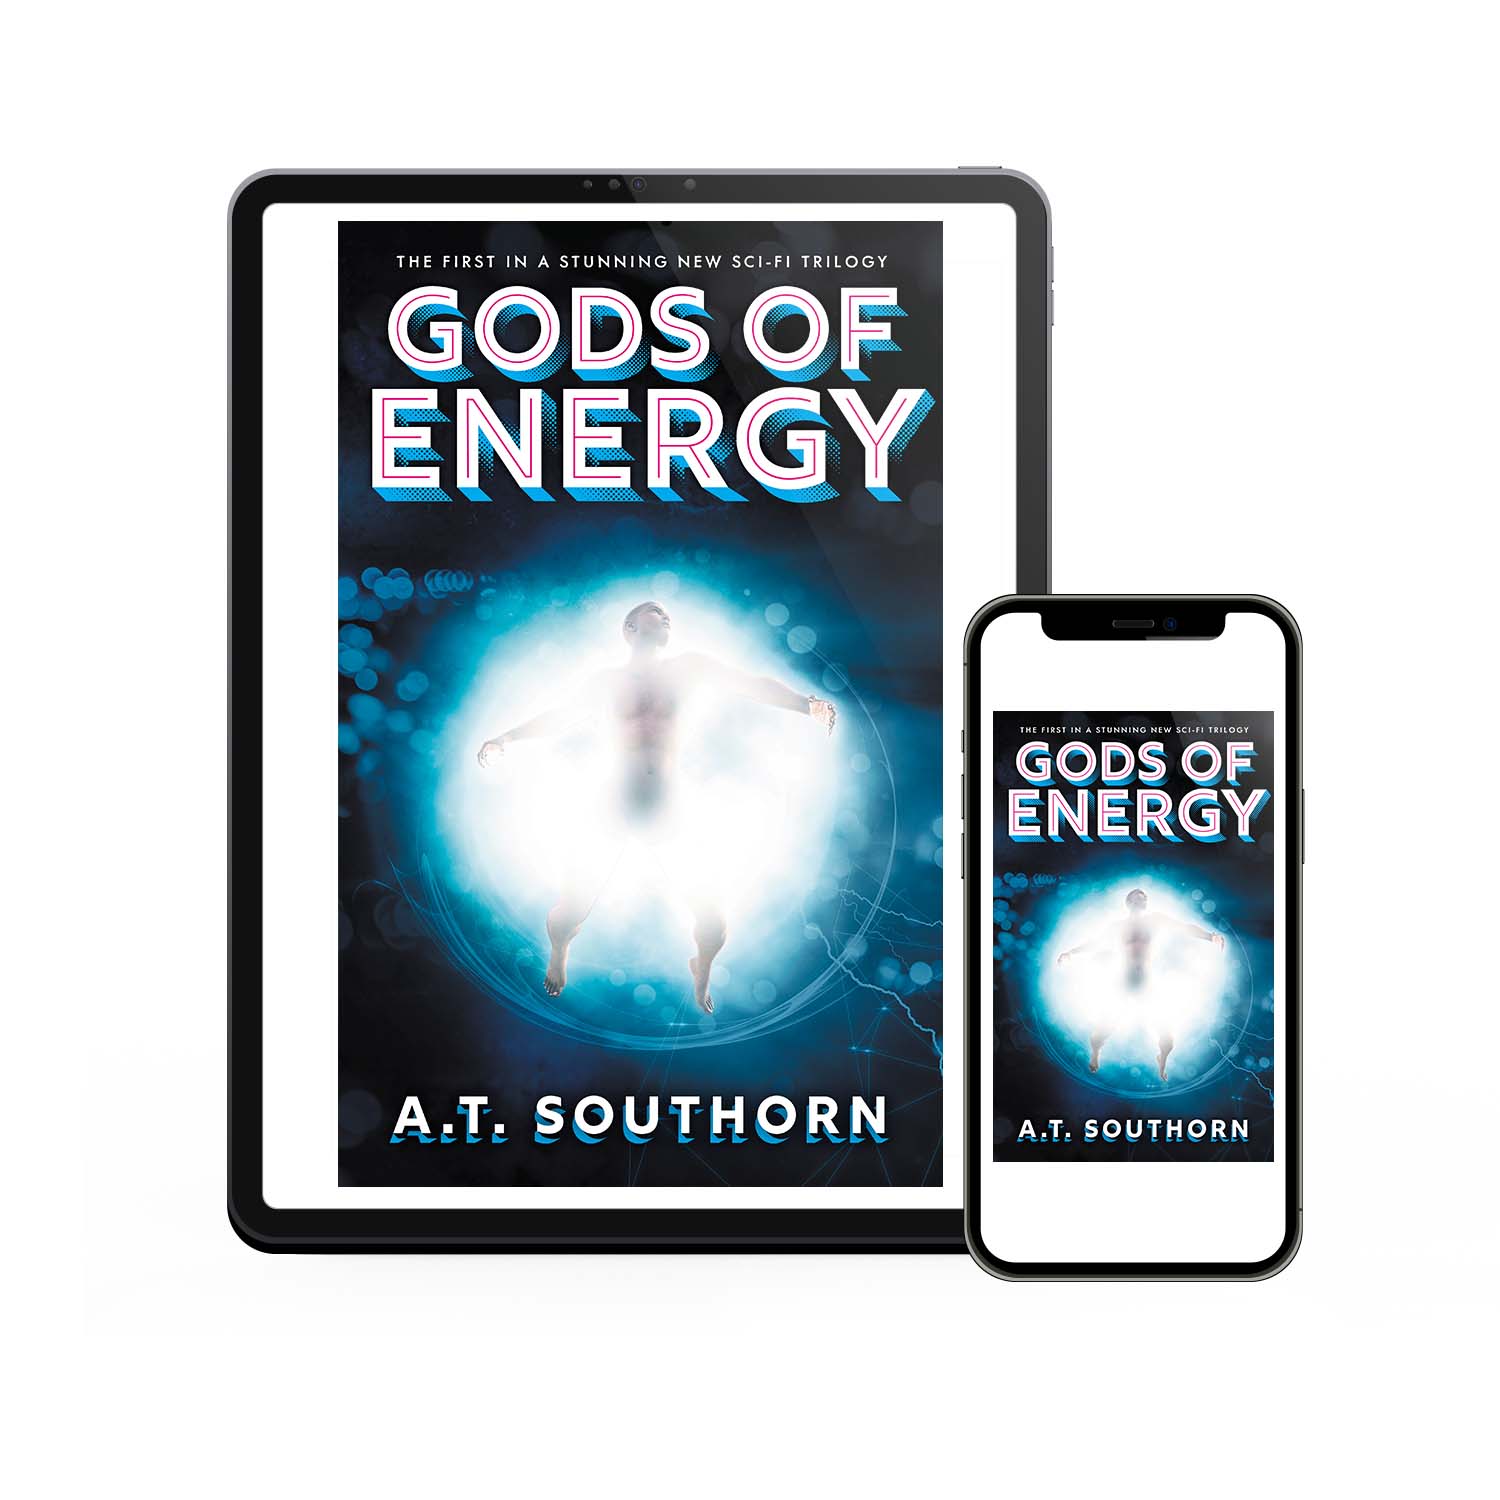 'Gods of Energy' is the first book in an electrifying new scifi trilogy by A.T Southorn. The book cover and interior formatting were designed by Mark Thomas of coverness.com. To find out more about my book design services, please visit www.coverness.com